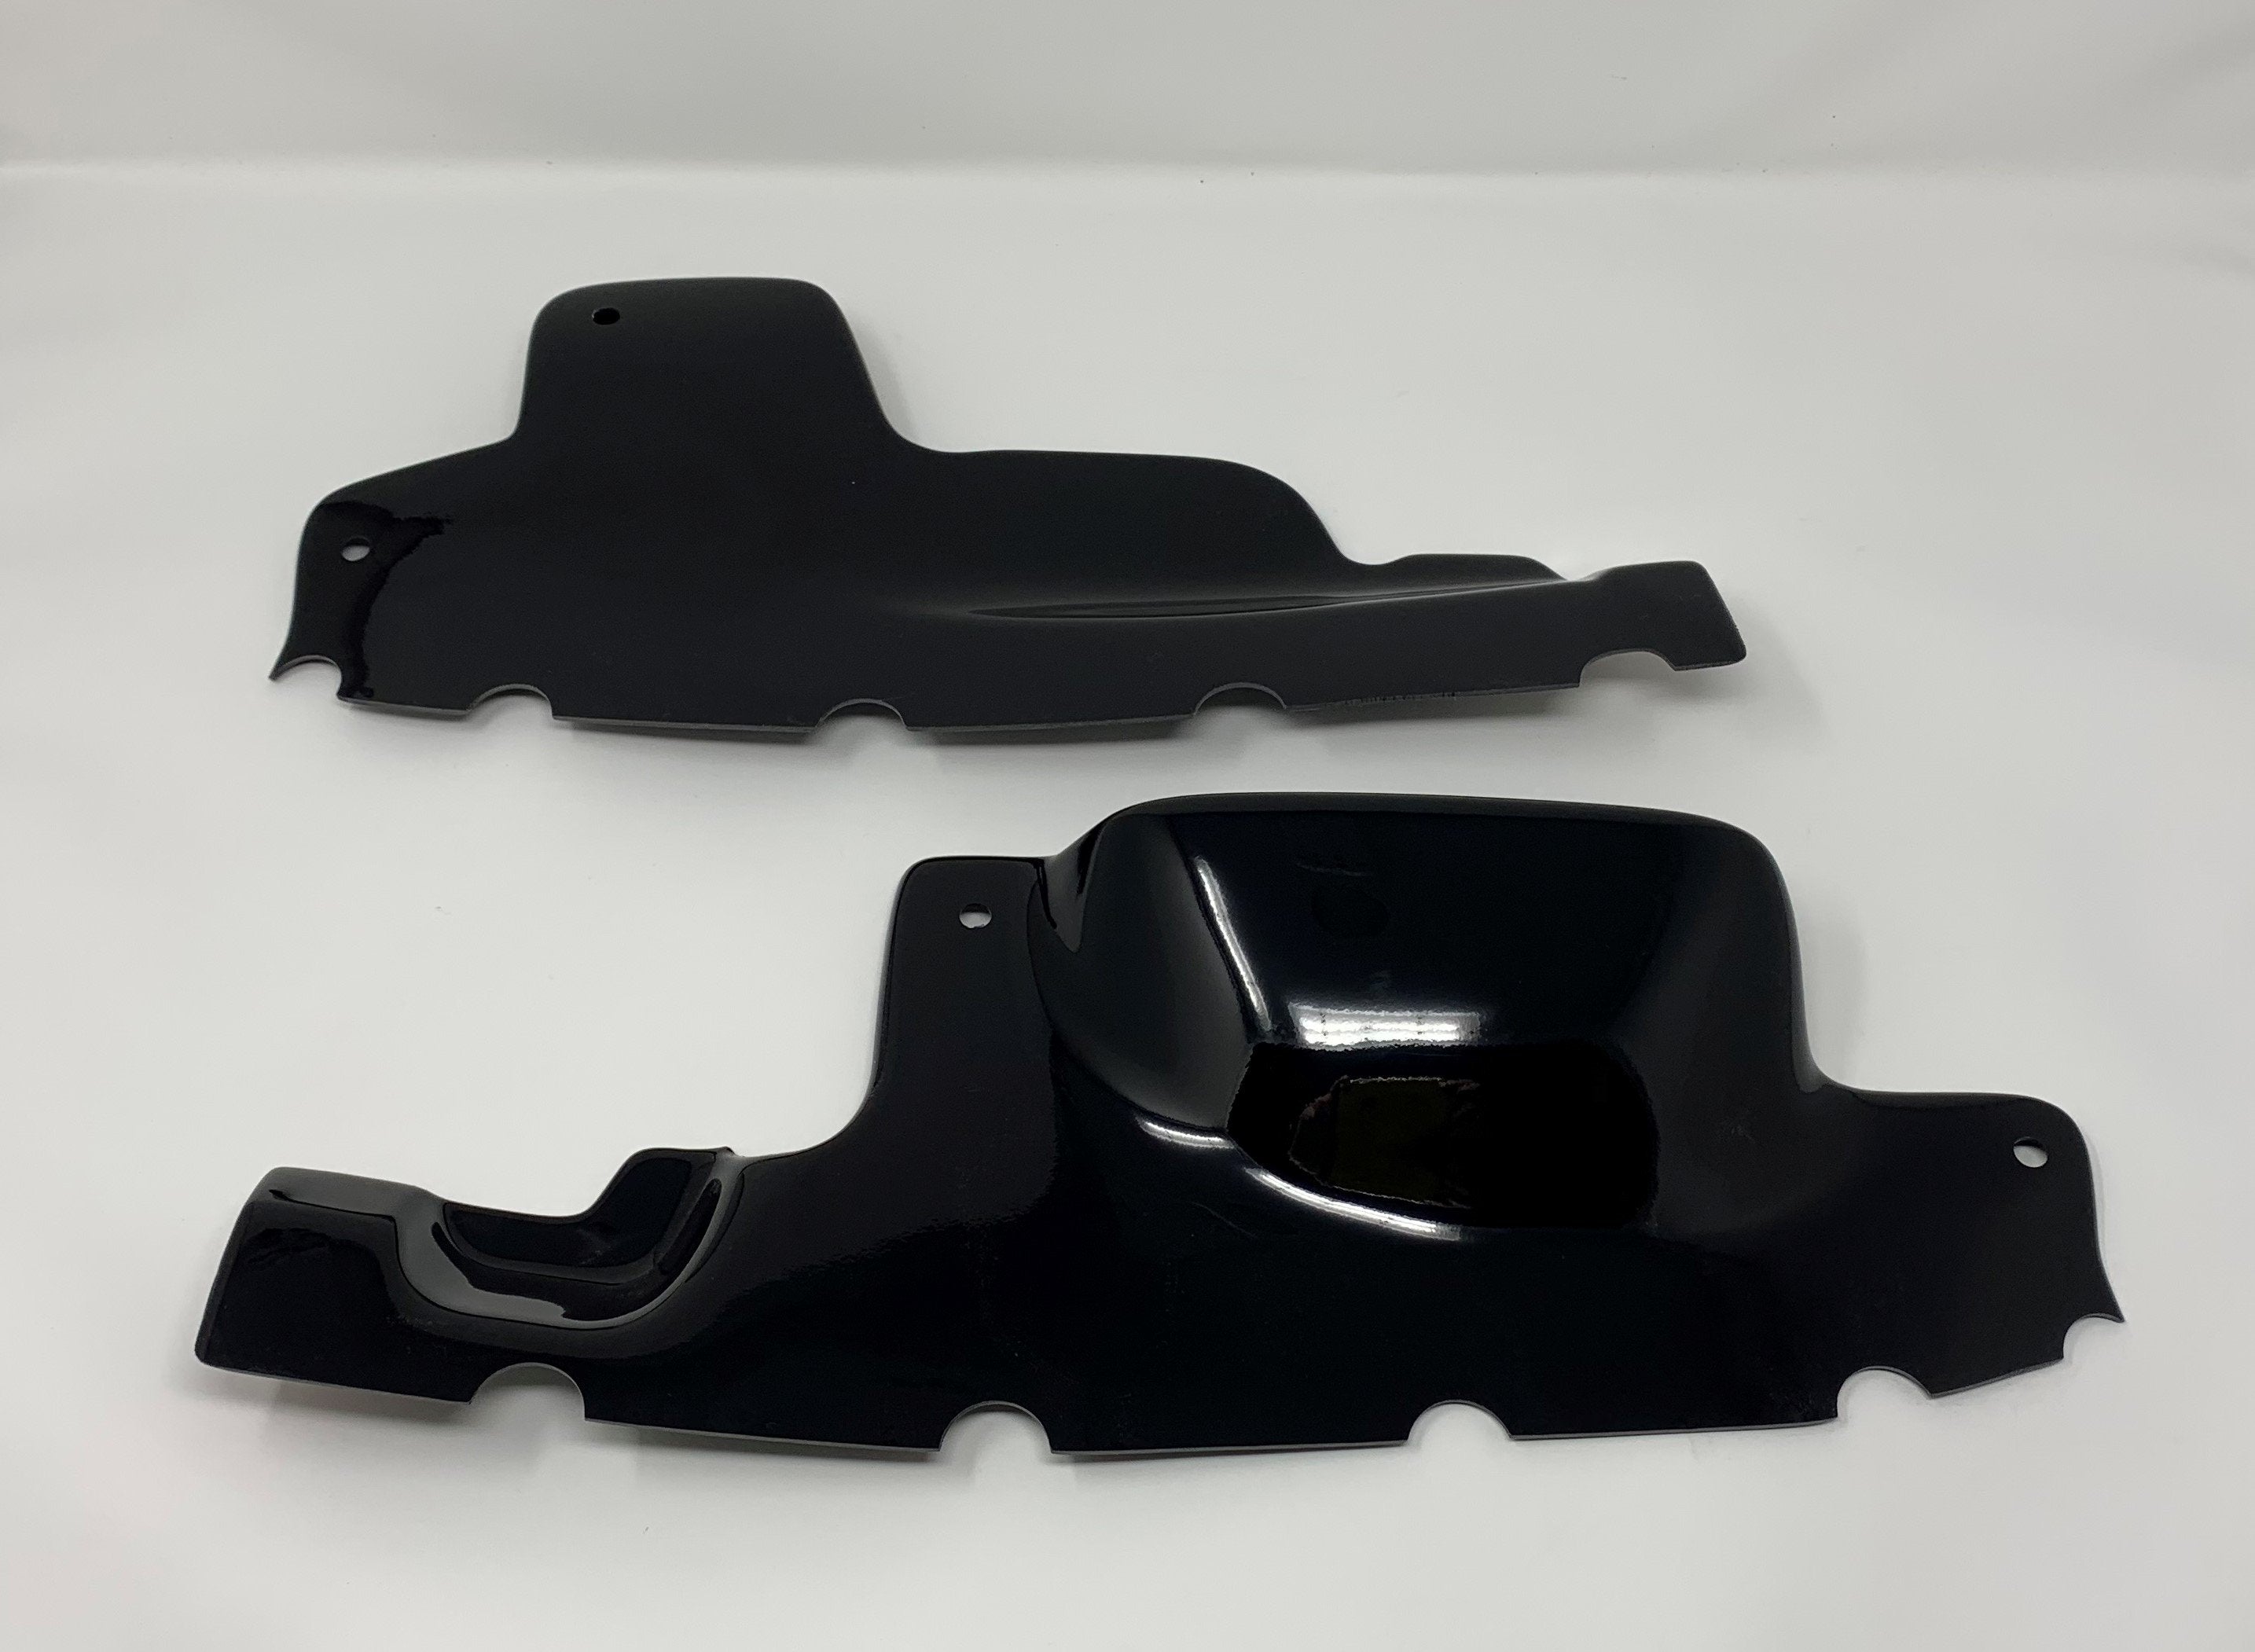 Proform Engine Bay Slam Panel Covers - MK7.5 Fiesta (Painted Finishes)